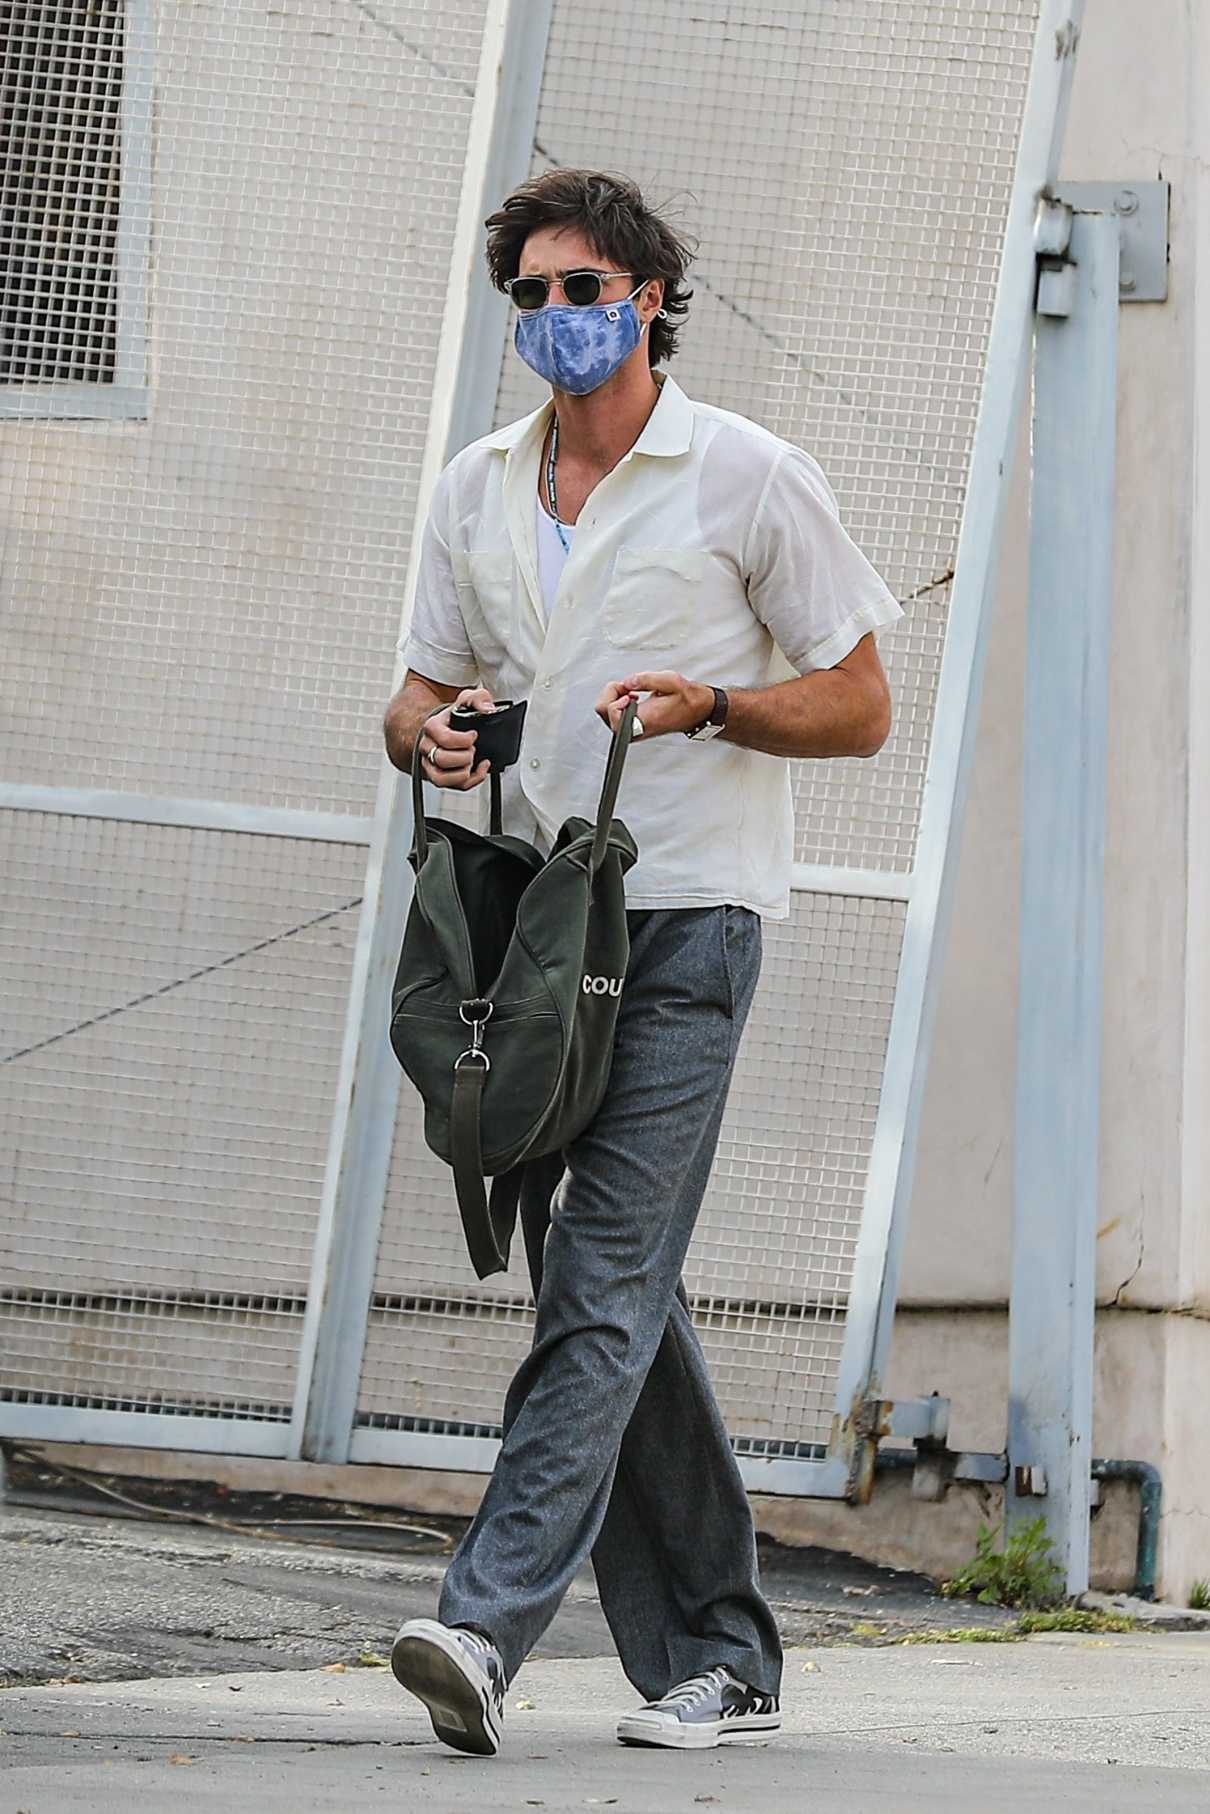 Jacob Elordi in a Protective Mask Was Seen Out in West Hollywood 04/12 ...